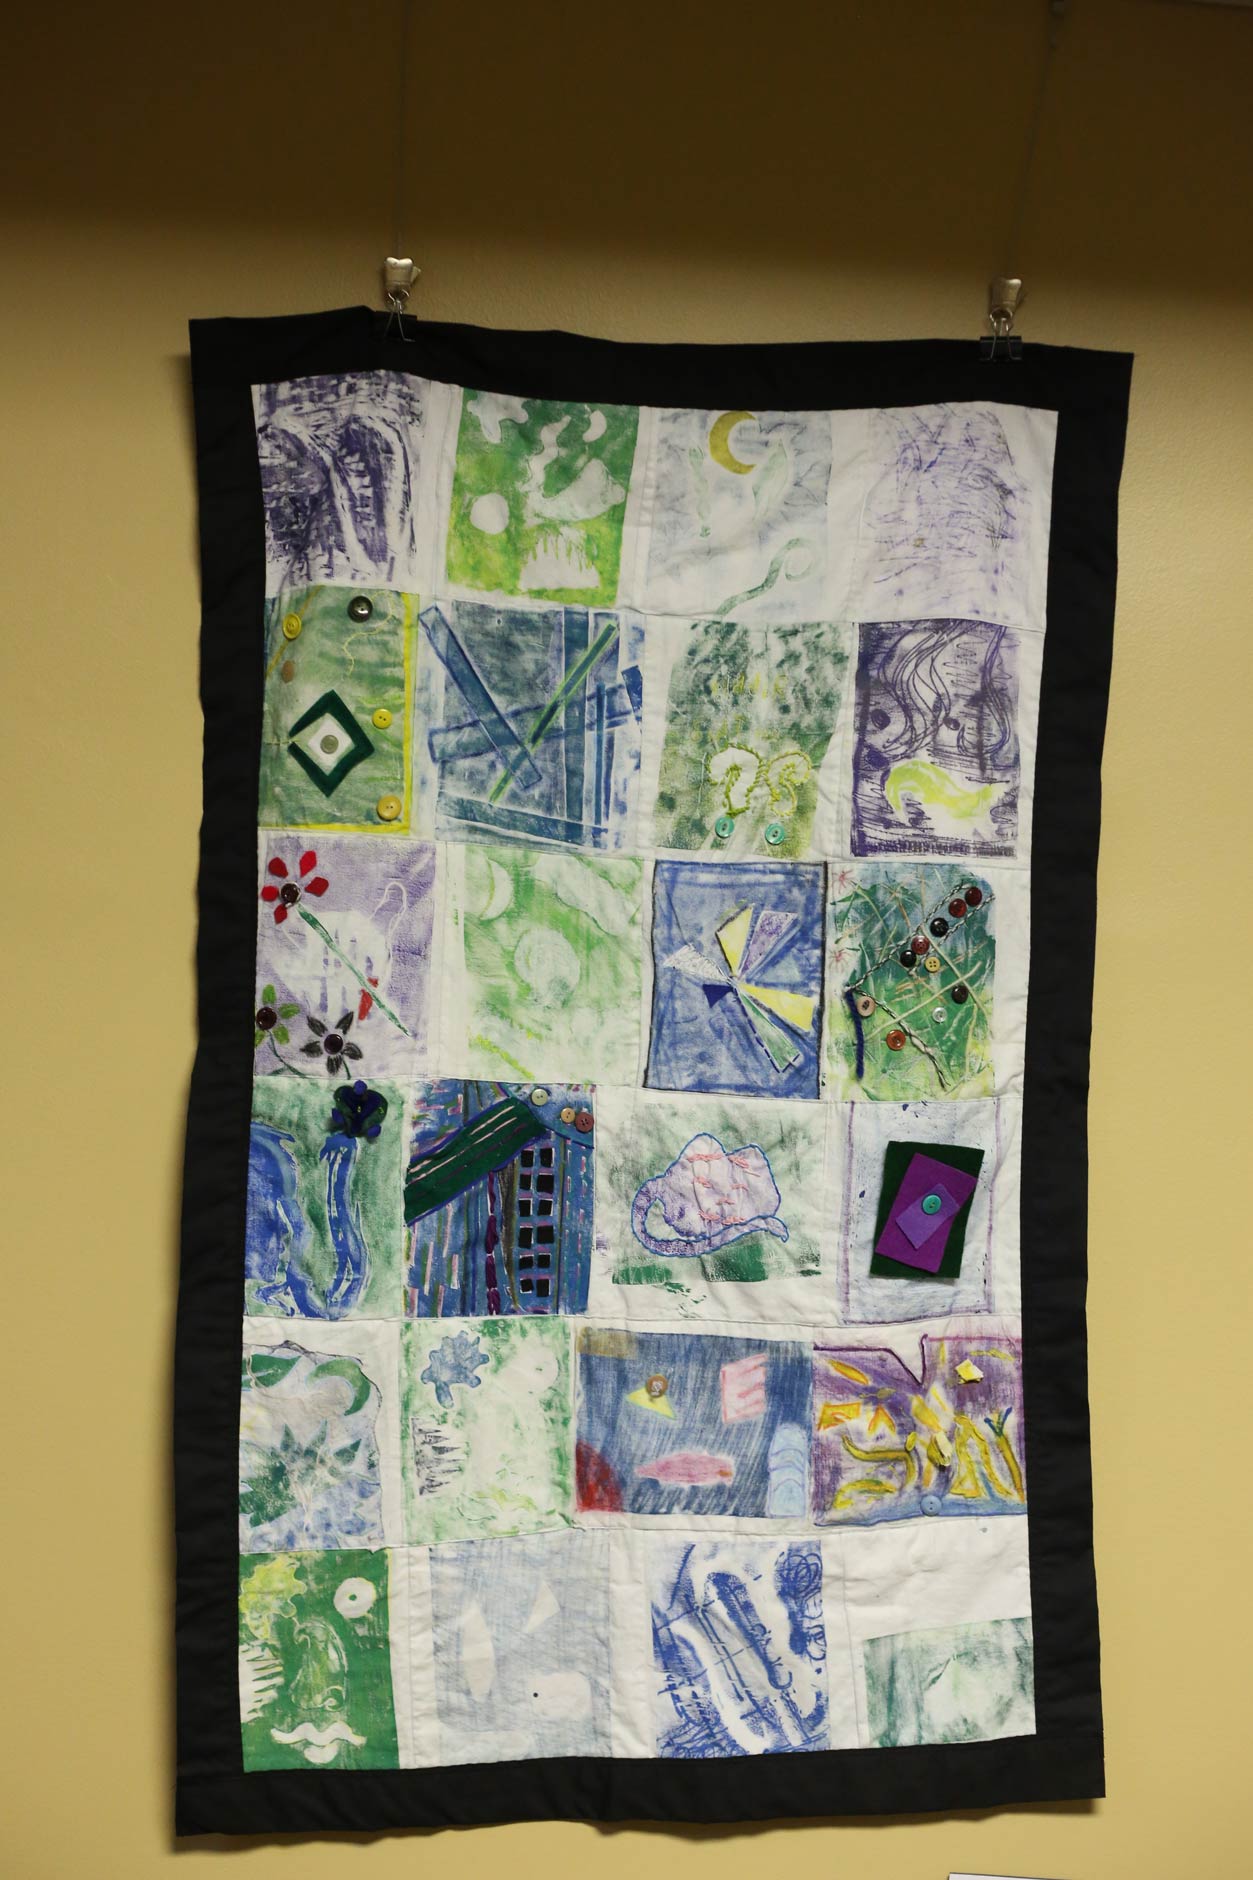 A quilt by student artists in the 2015 Youth Arts Program.